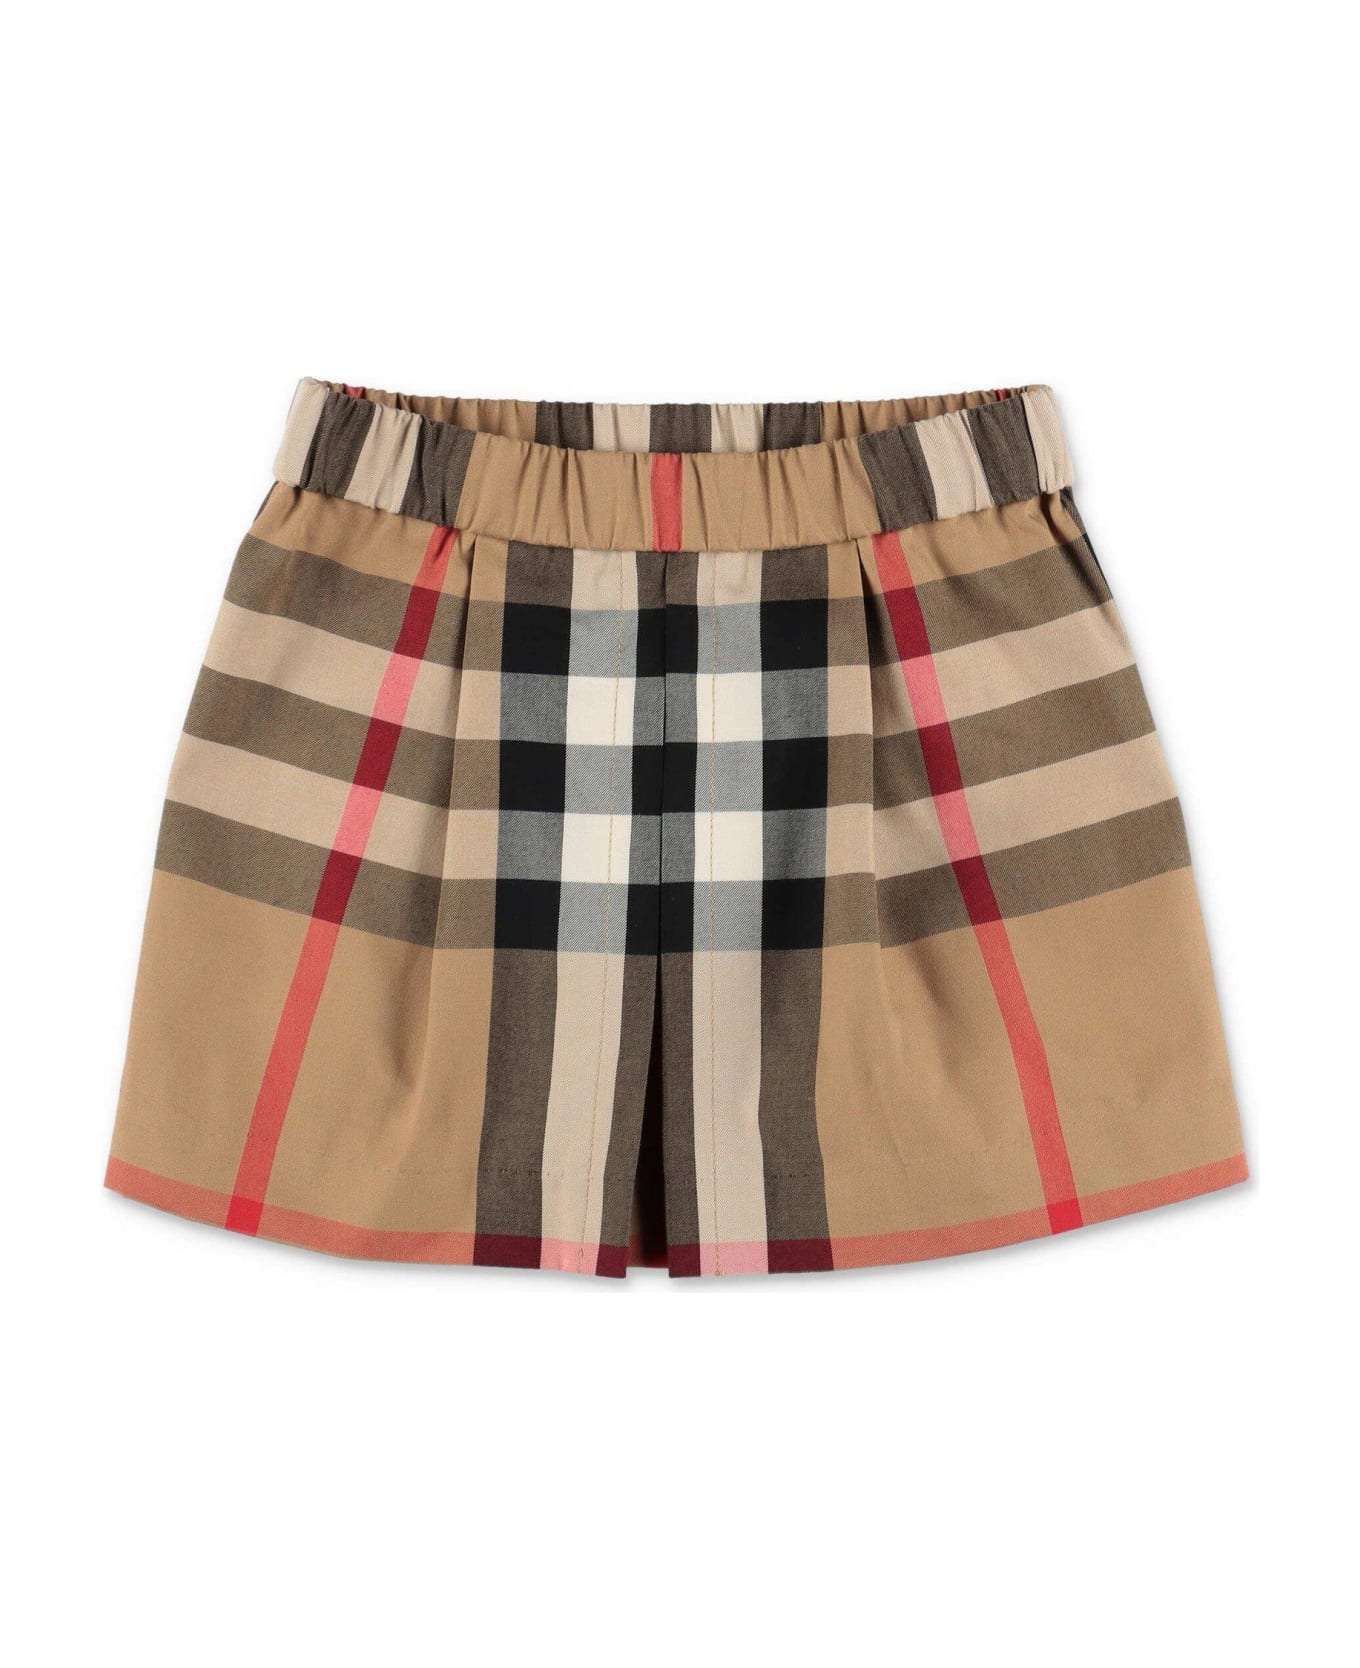 Burberry Checked Elastic Waist Skirt - Archive beige ip chk ボトムス